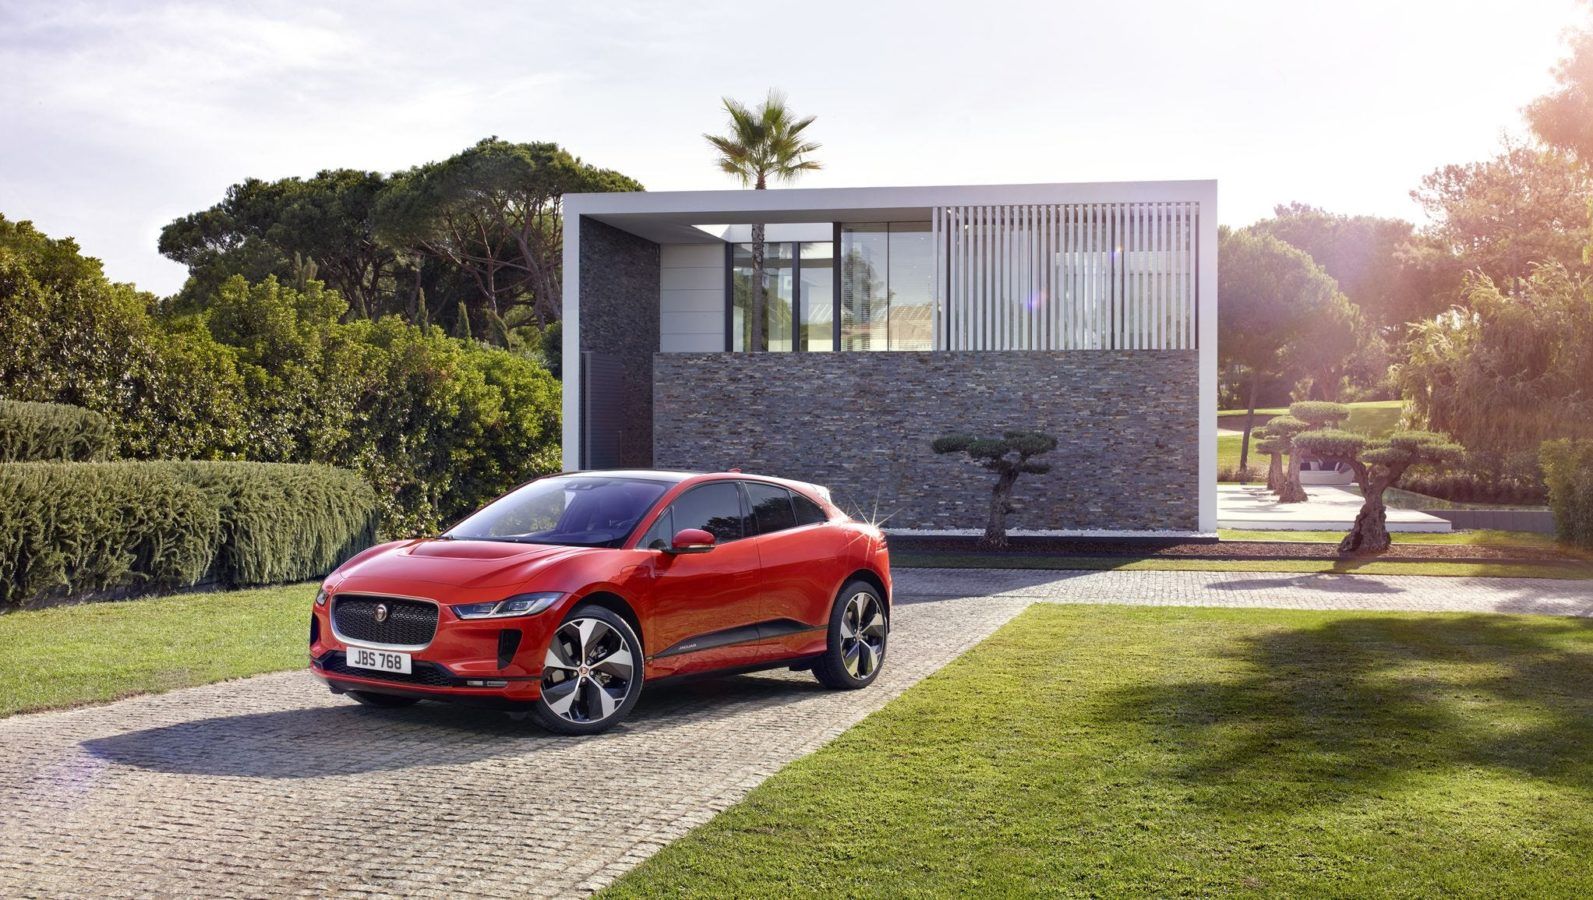 Supercharged: The Jaguar I-Pace, their all new electric SUV is now in India